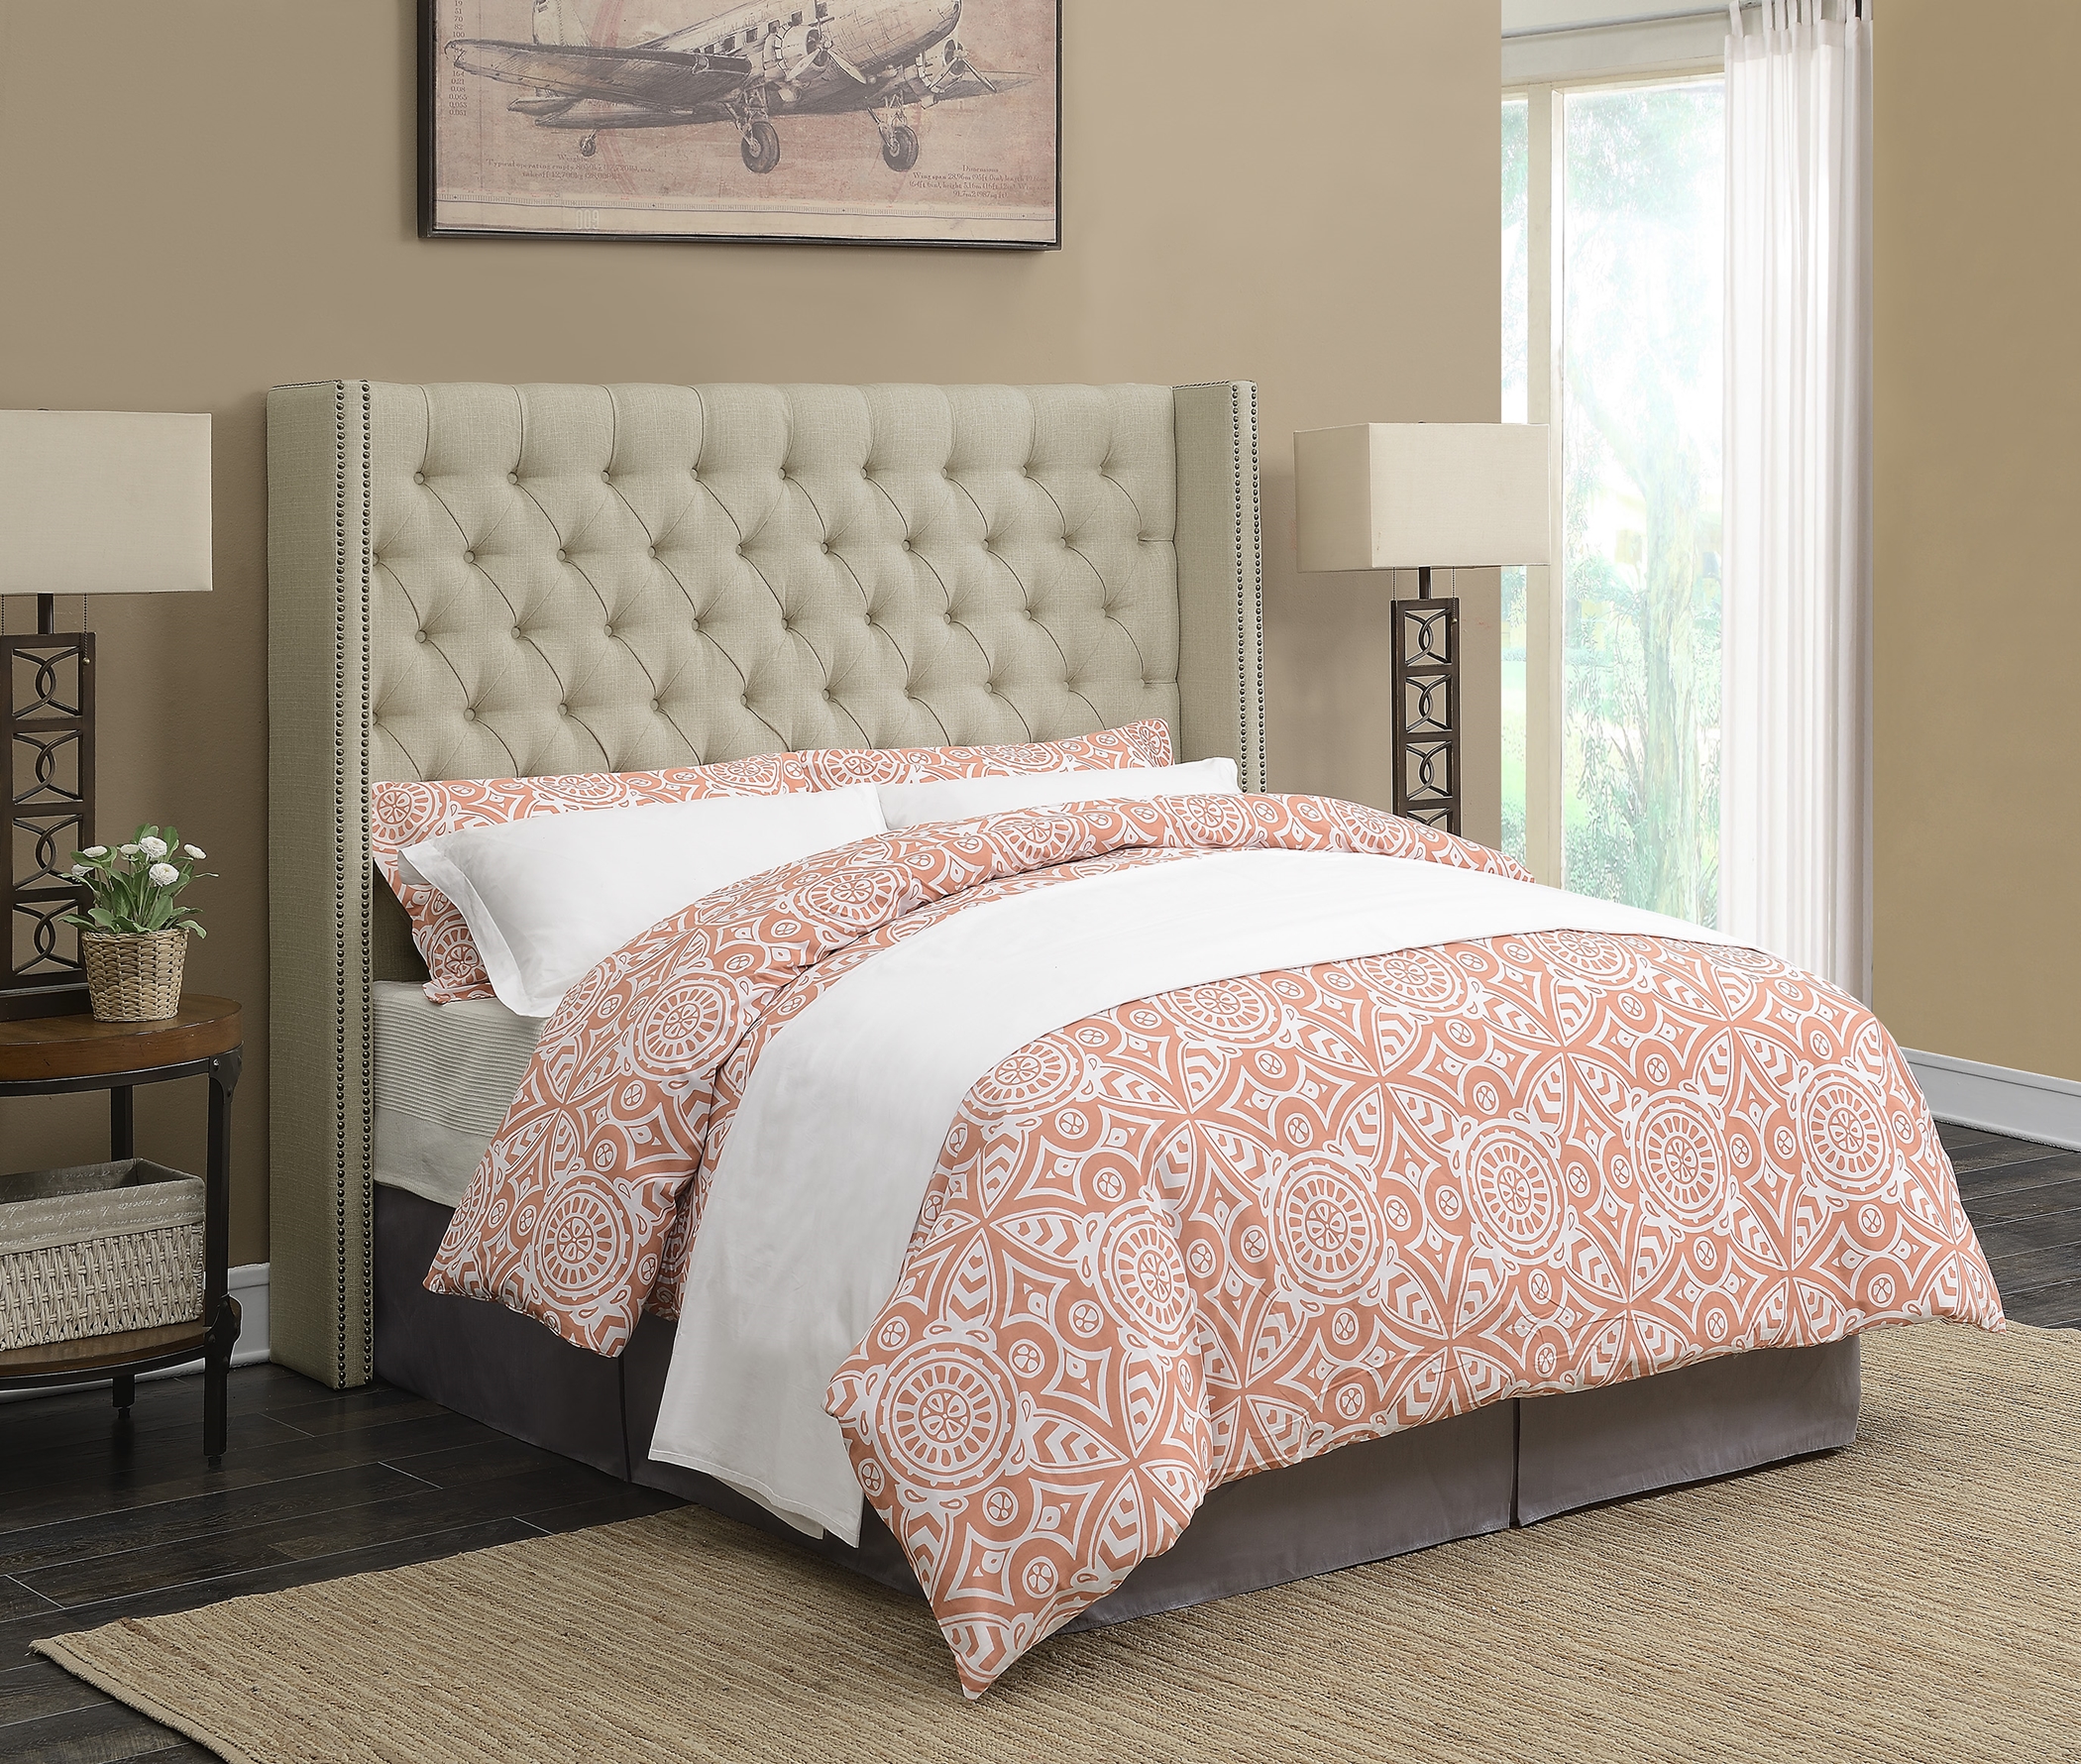 Benicia Beige Upholstered Full Headboard - Click Image to Close